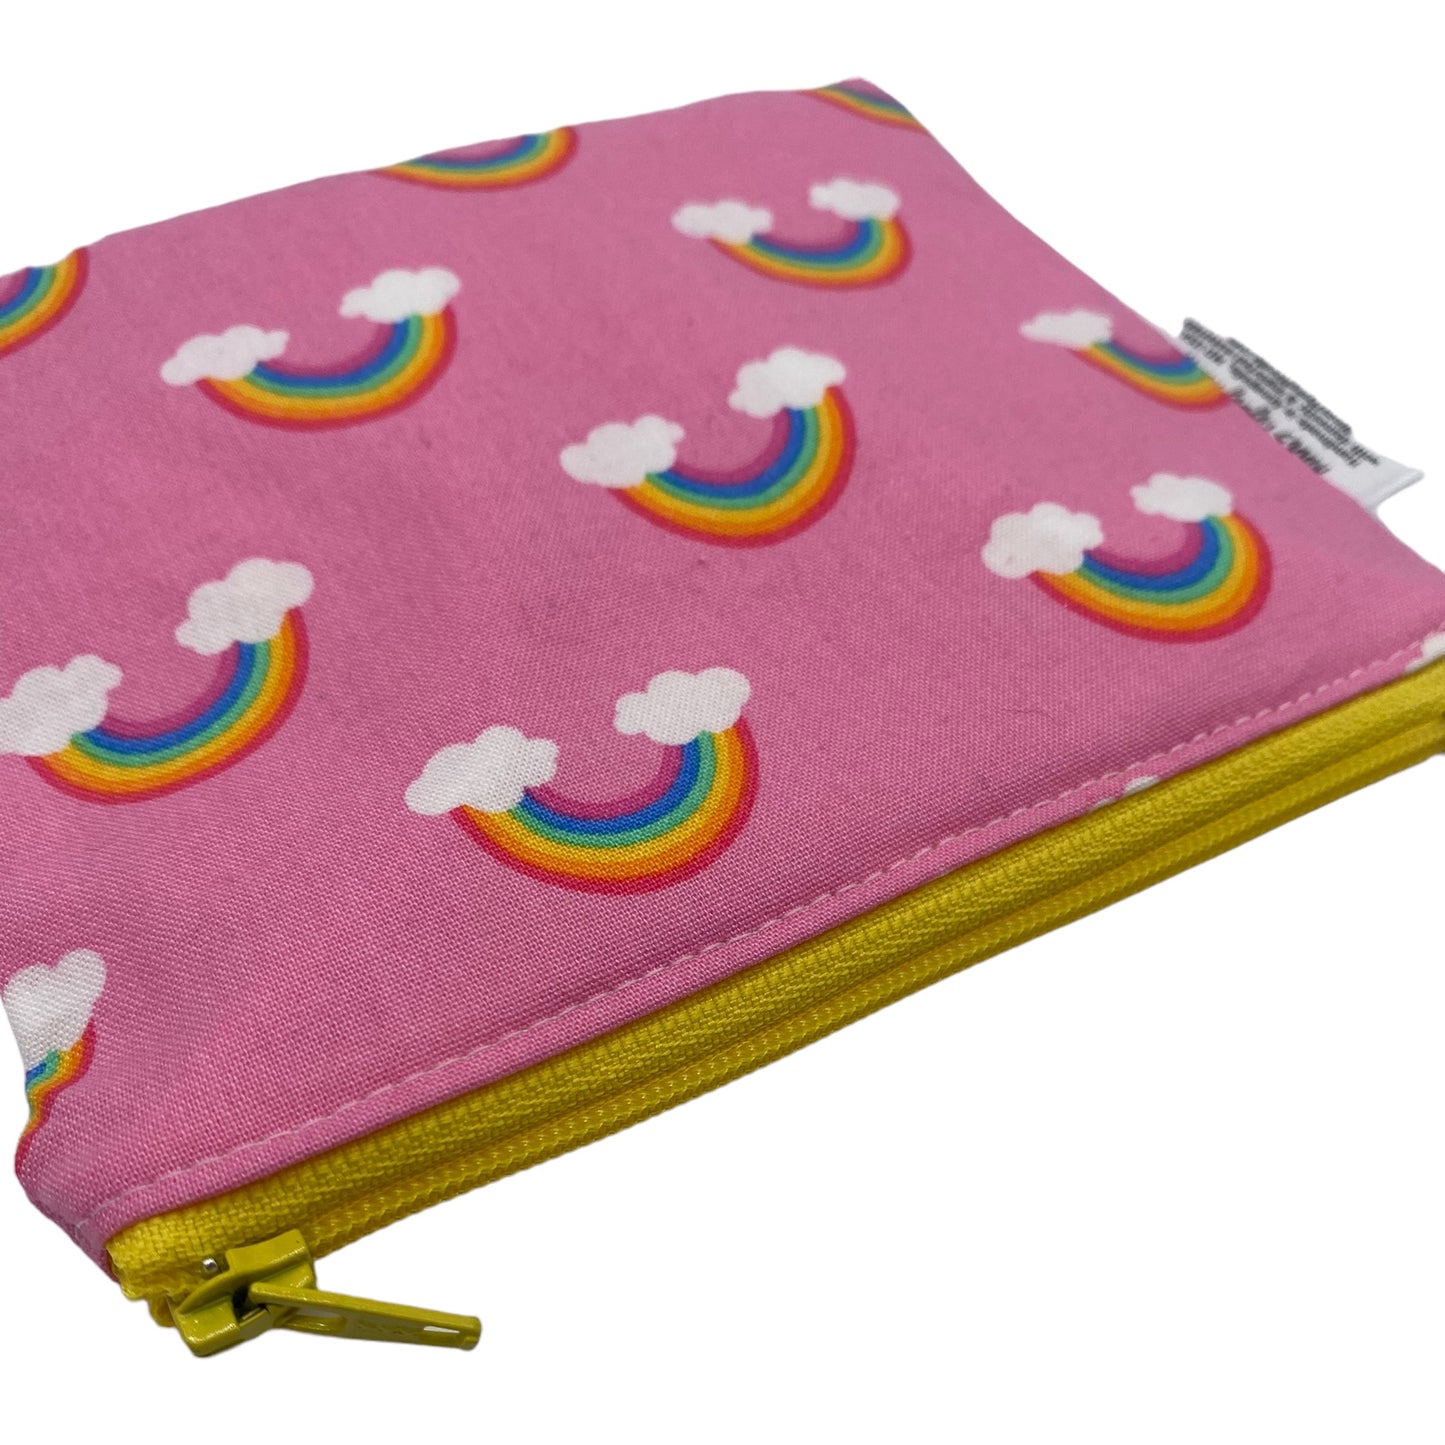 Toddler Sized Reusable Zippered Bag Rainbow on Clouds